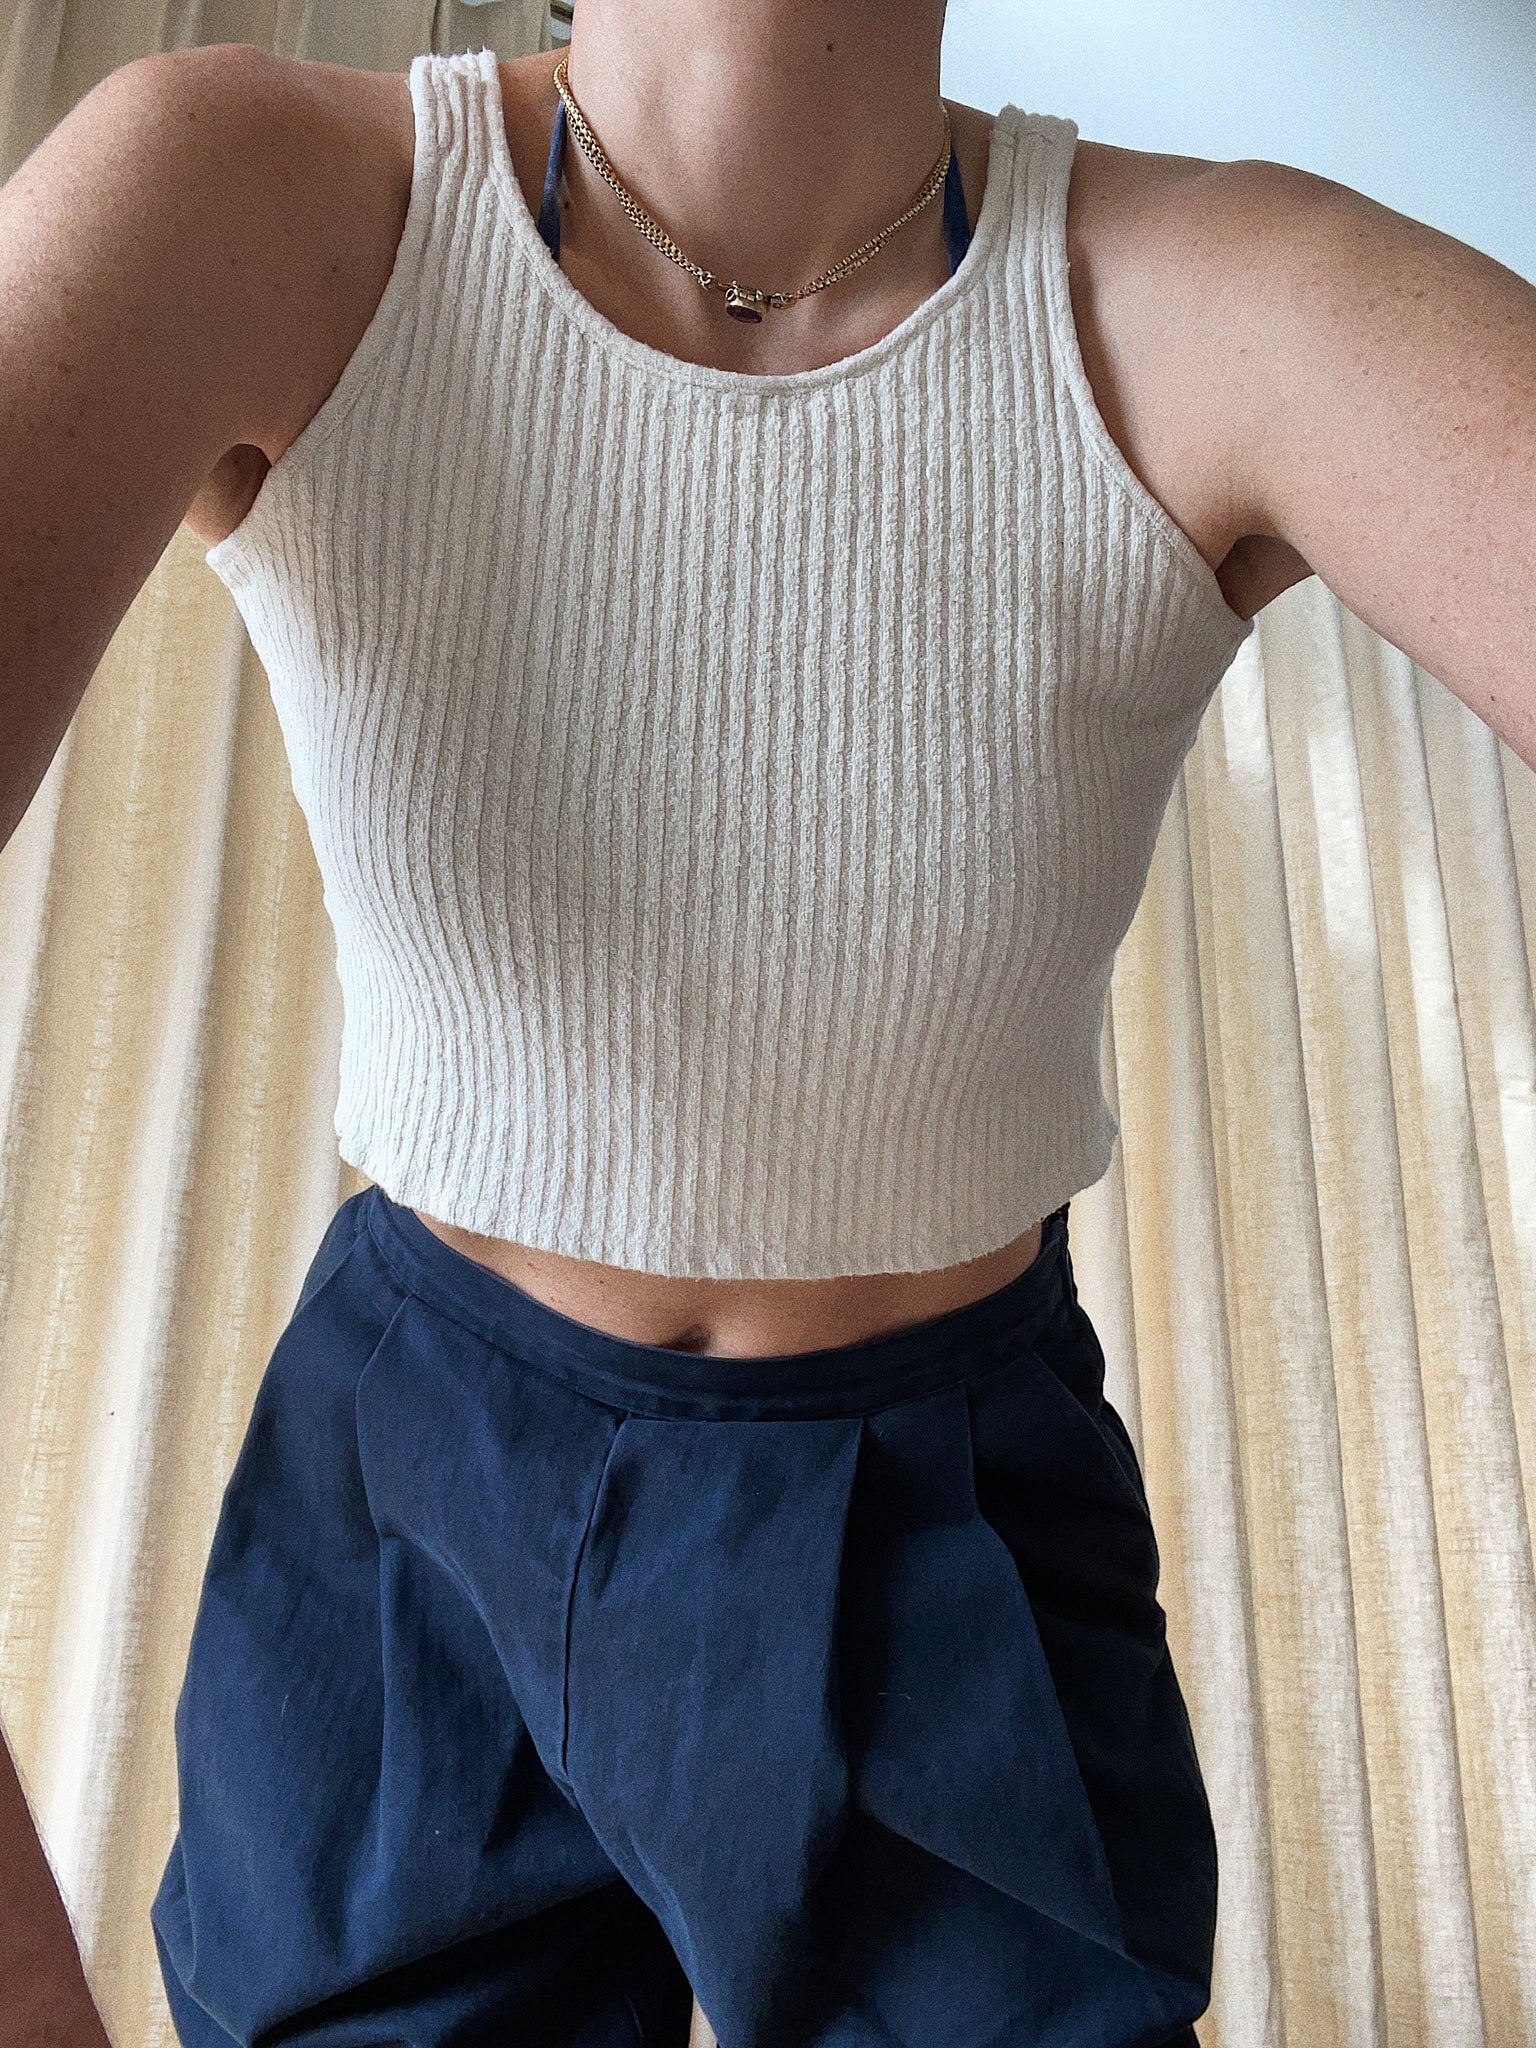 certified organic cotton and hemp tank top in off white color made ethically. cropped tank top in this photo. Ribbed cropped tank top in off white.